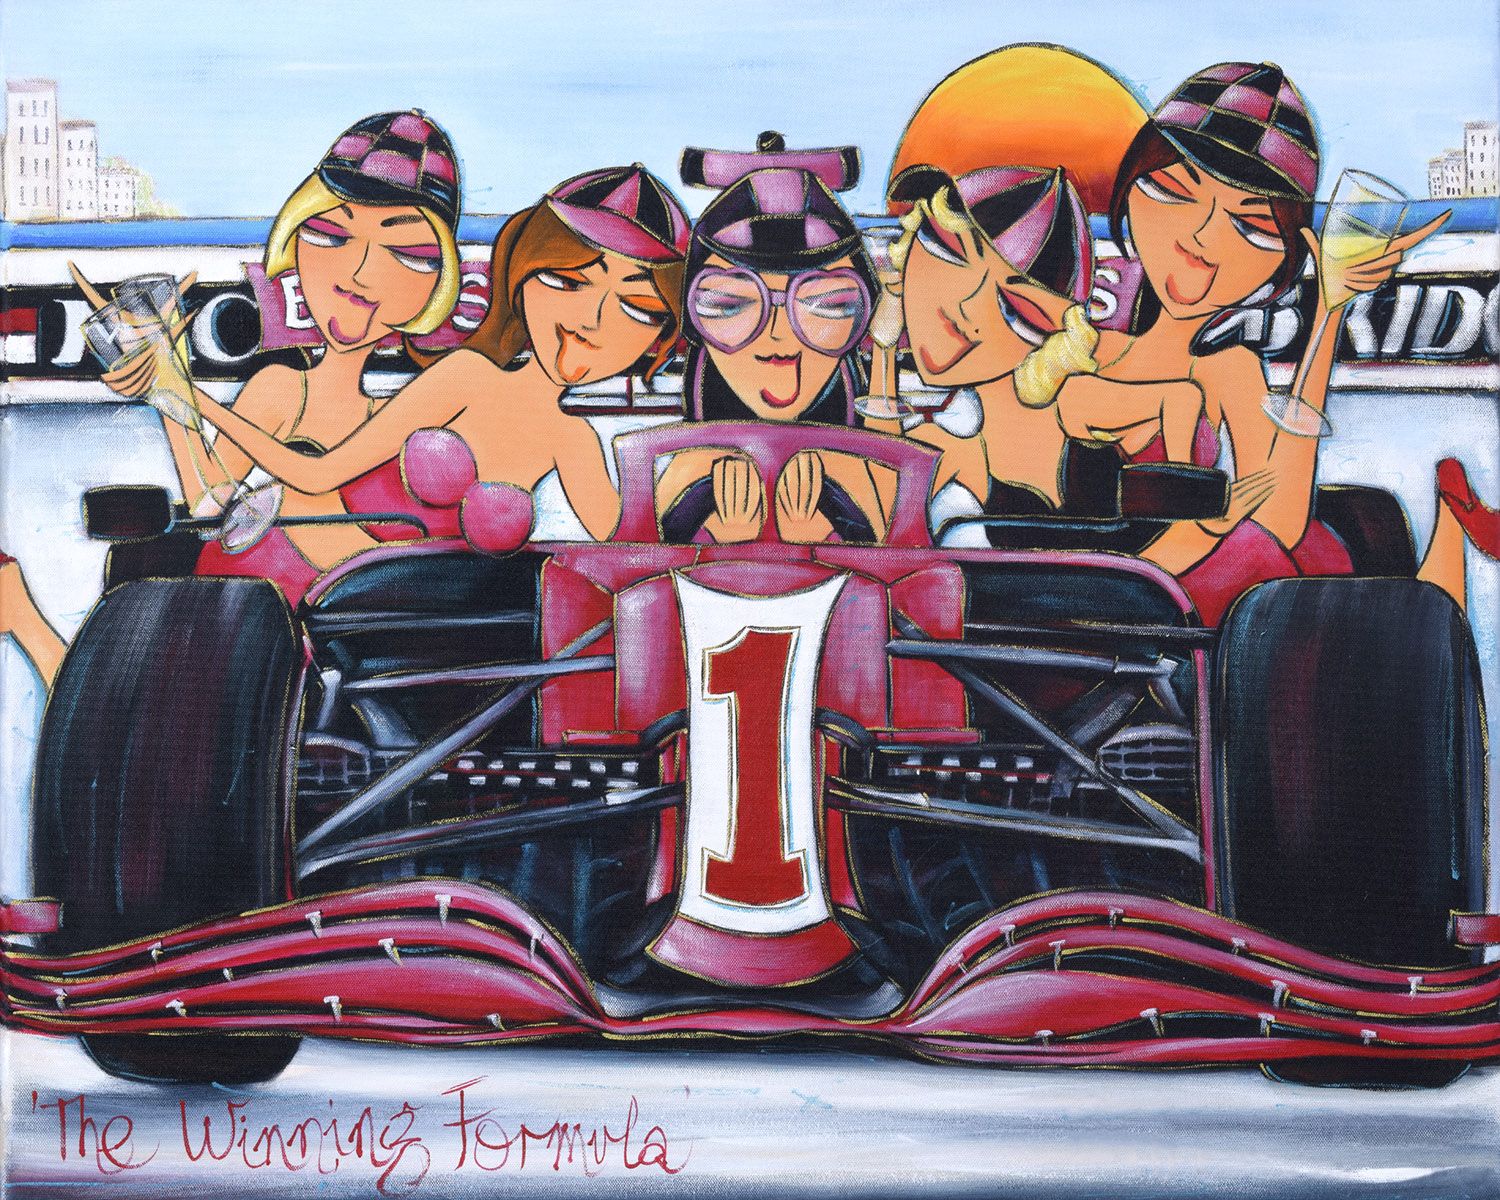 Natalie Dyer - 'The Winning Formula' - Limited Edition Print